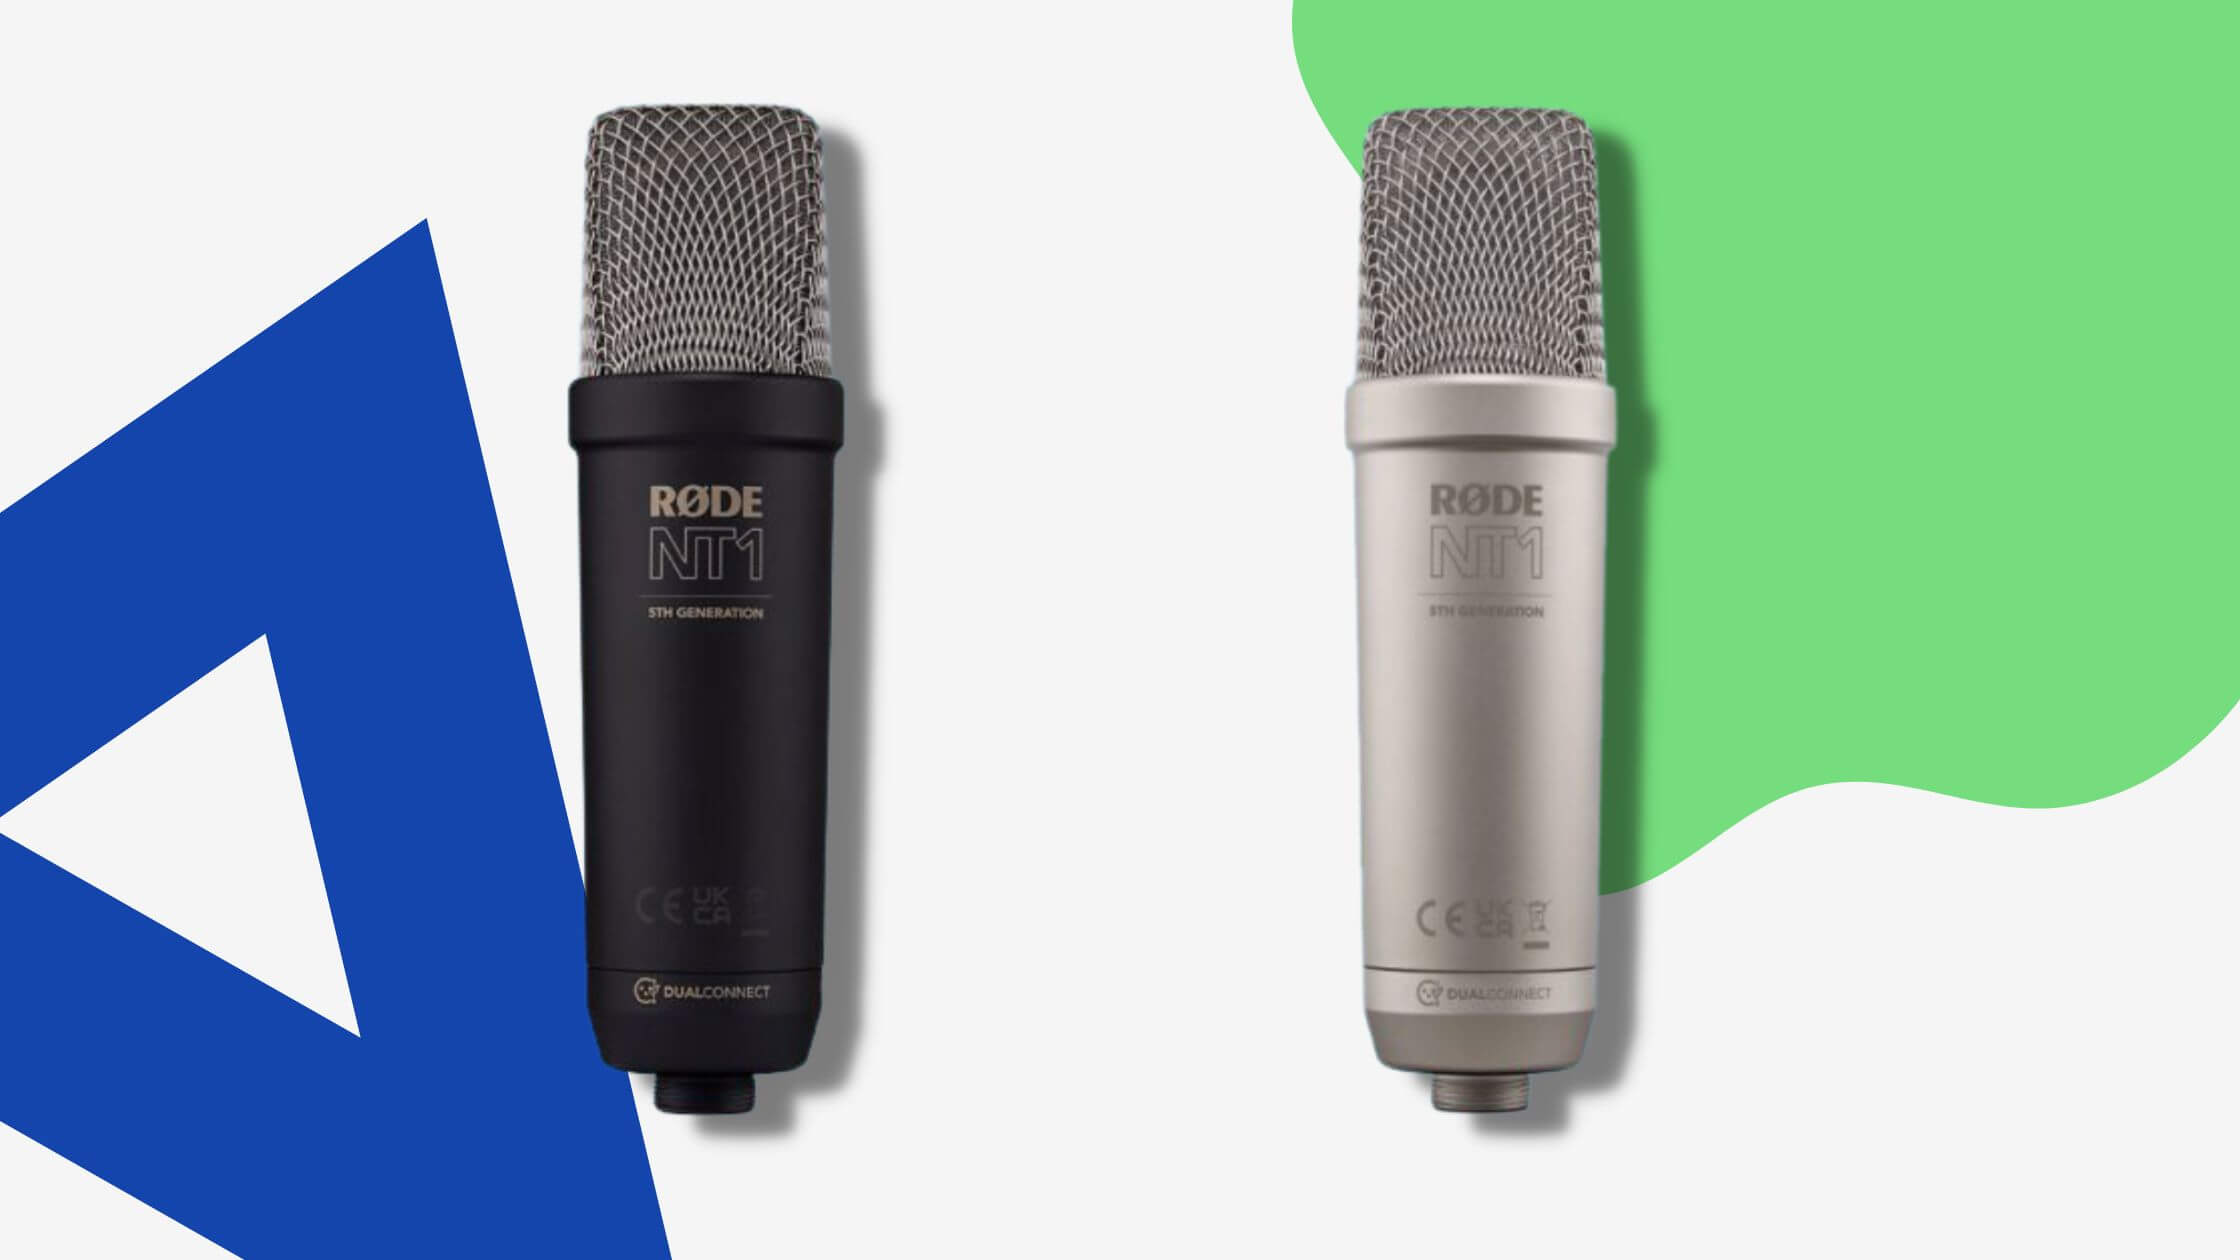 Rode announces NT1 5th Generation – the world’s most popular studio microphone gets an upgrade